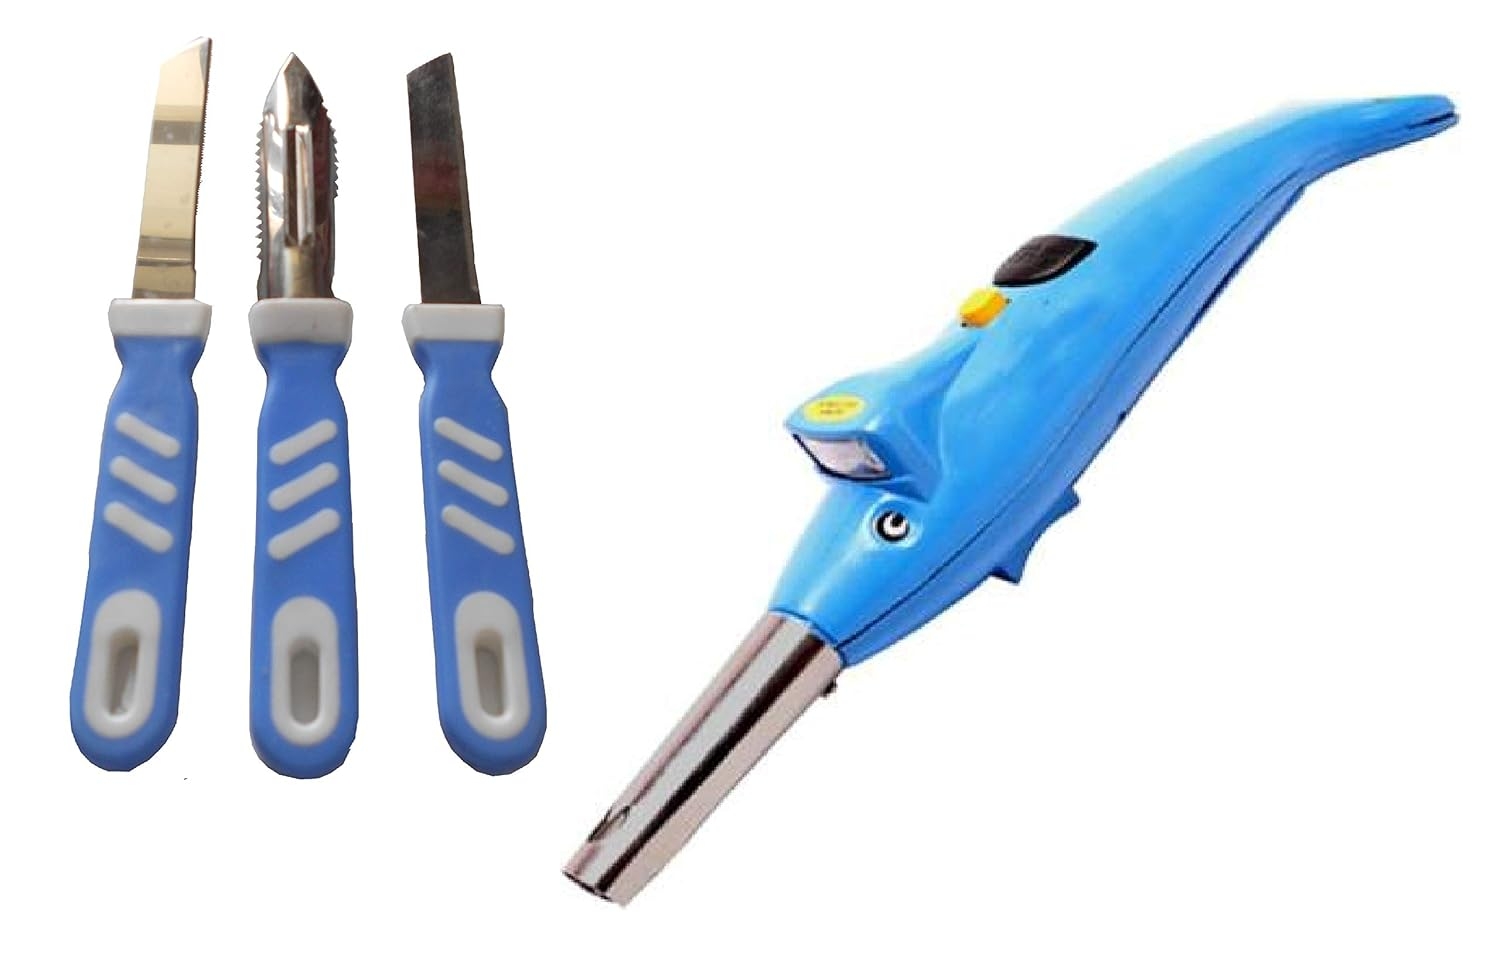 Plastic Kitchen Gas Lighter | Electric Dolphin Shaped | Multicolor LED Torch | Sharp Wavy Edge Knives Set of 3 | Stainless Steel Peeler Gas Lighters